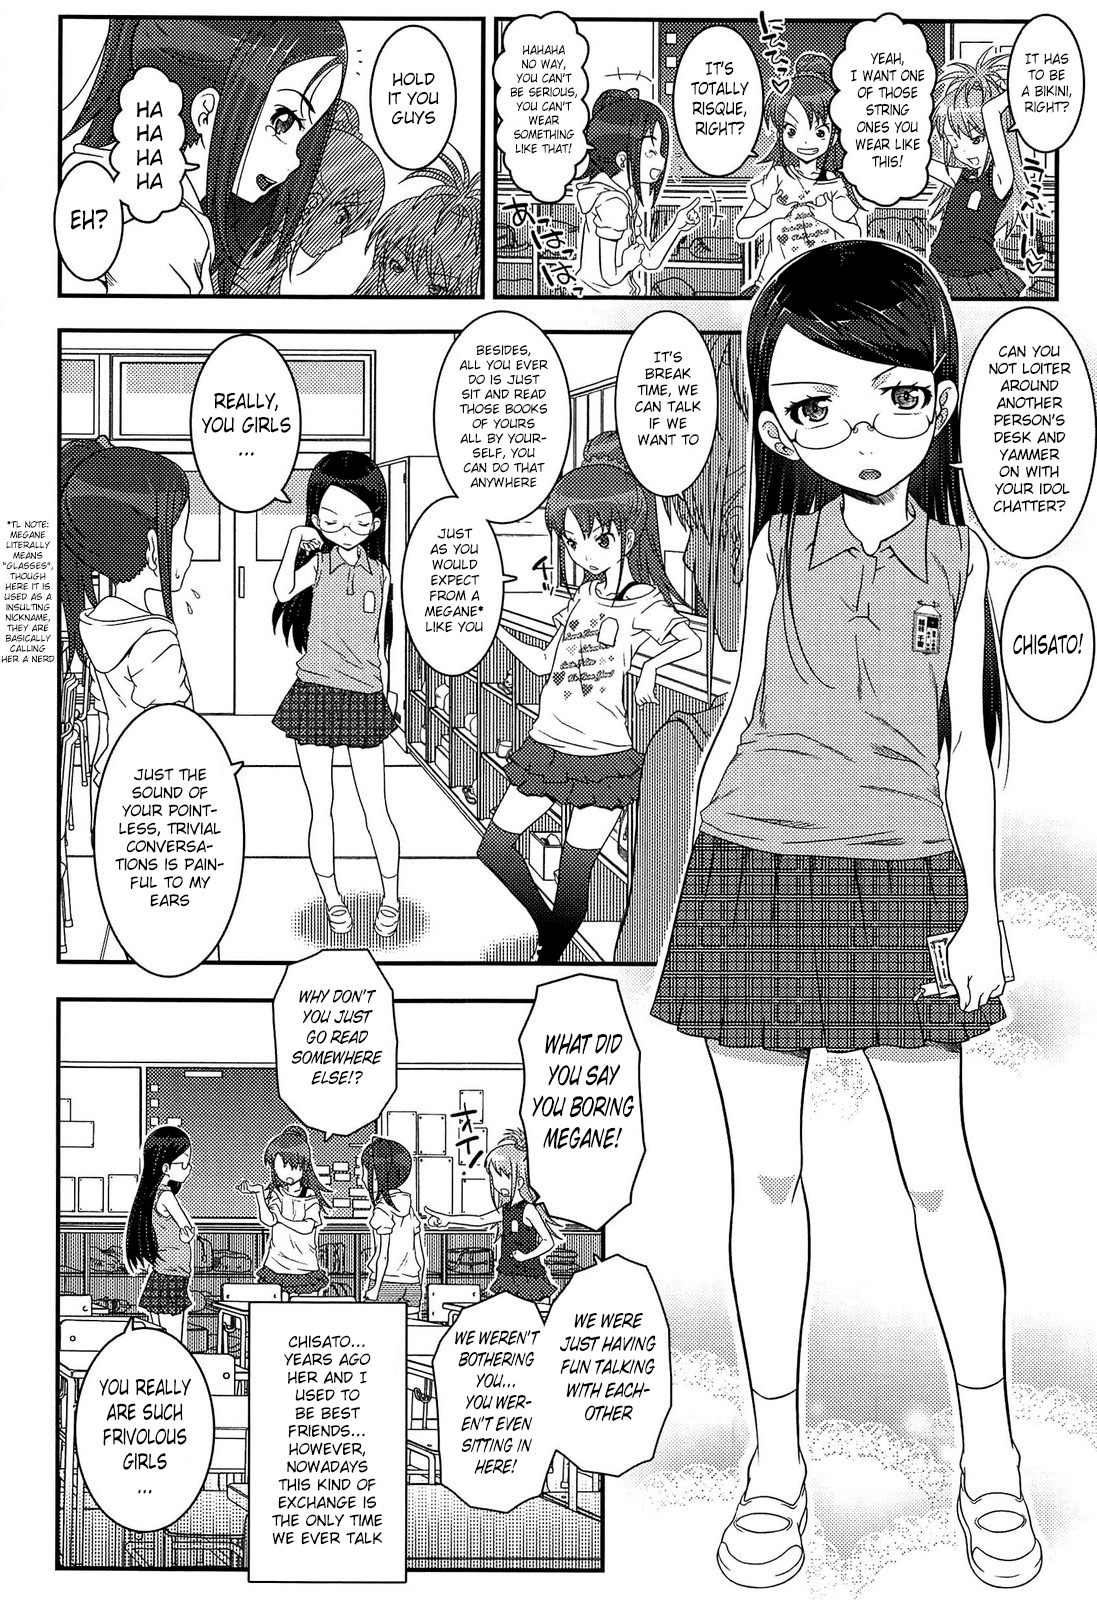 [mdo-h] Kanojo-tachi no Kankei + Sonogo | Their Relationship + After Story [English] [DMD] page 2 full